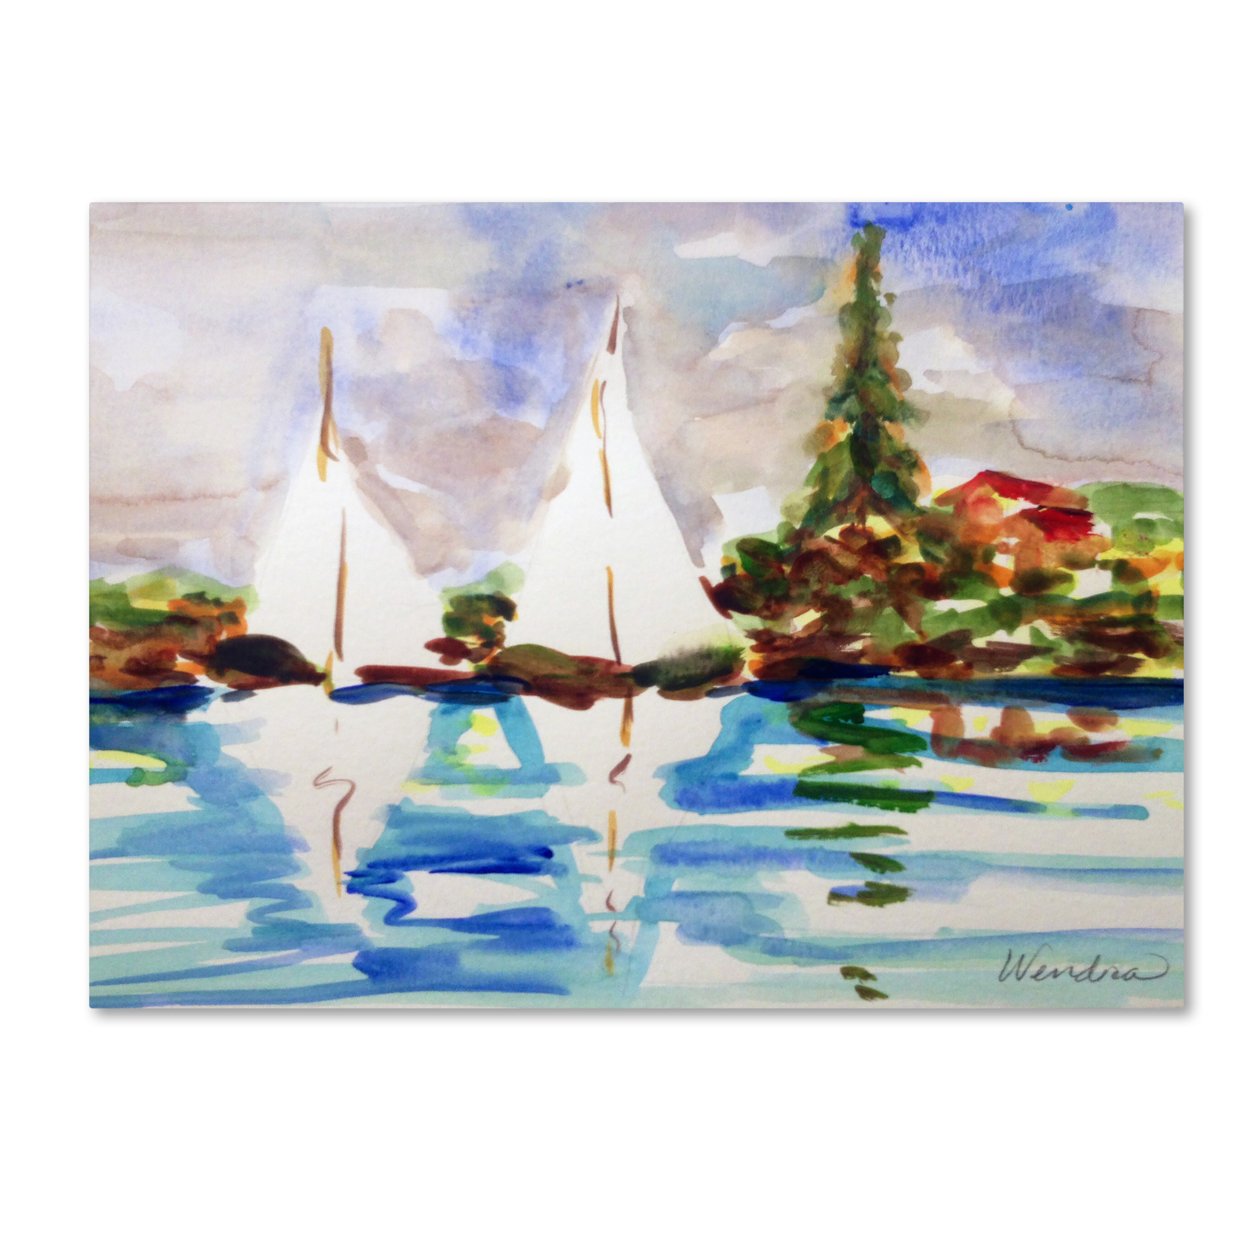 Wendra 'A Lovely Day' Canvas Art 18 X 24